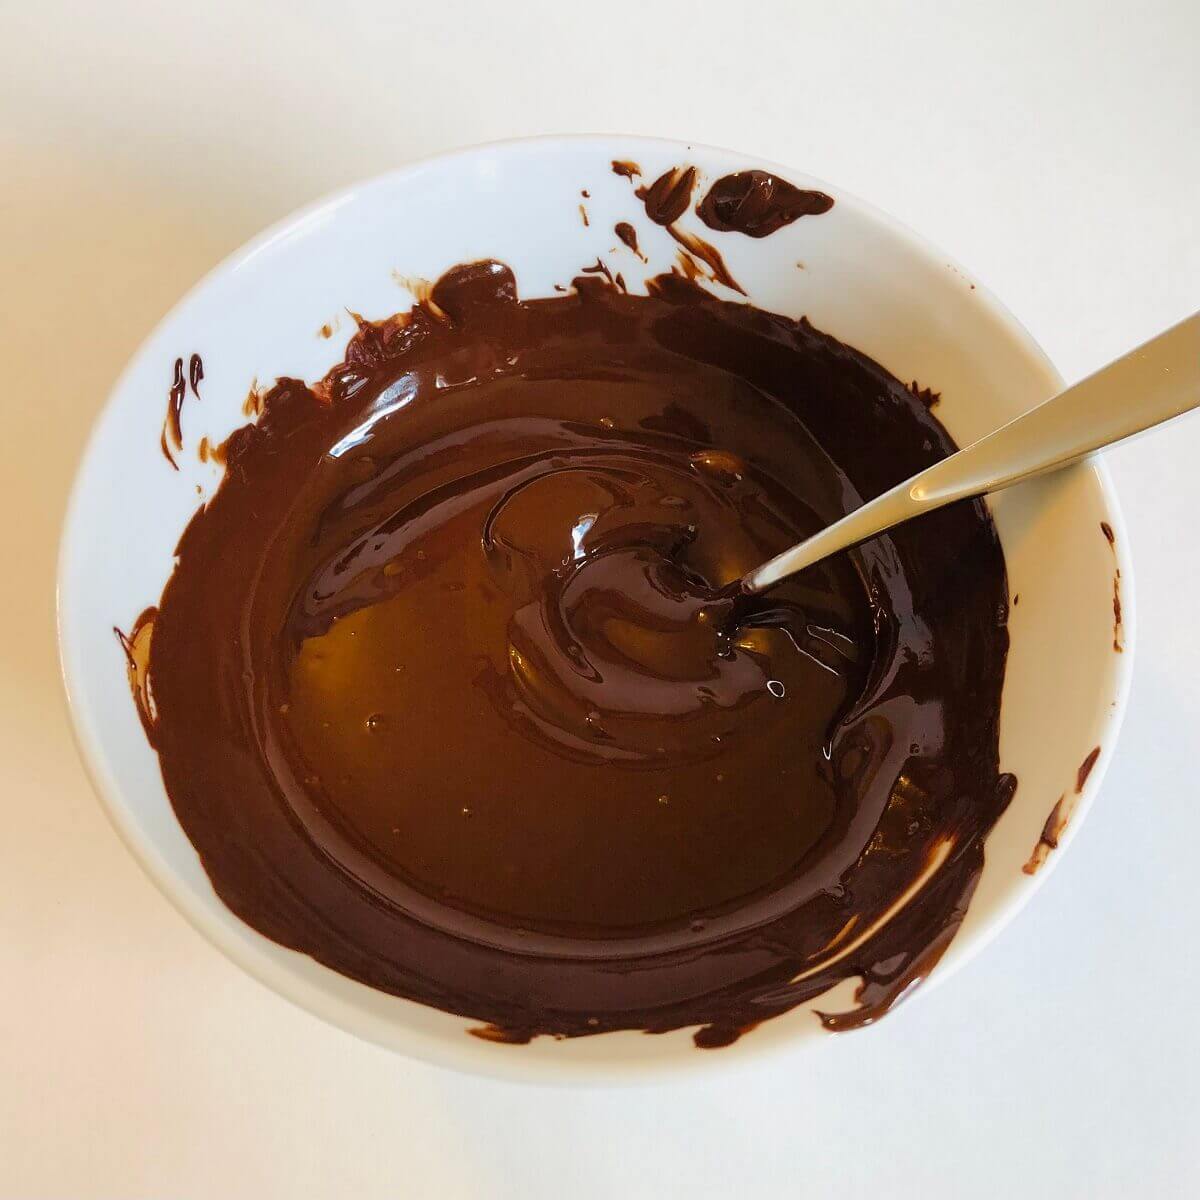 A bowl of warm, melted dark chocolate.